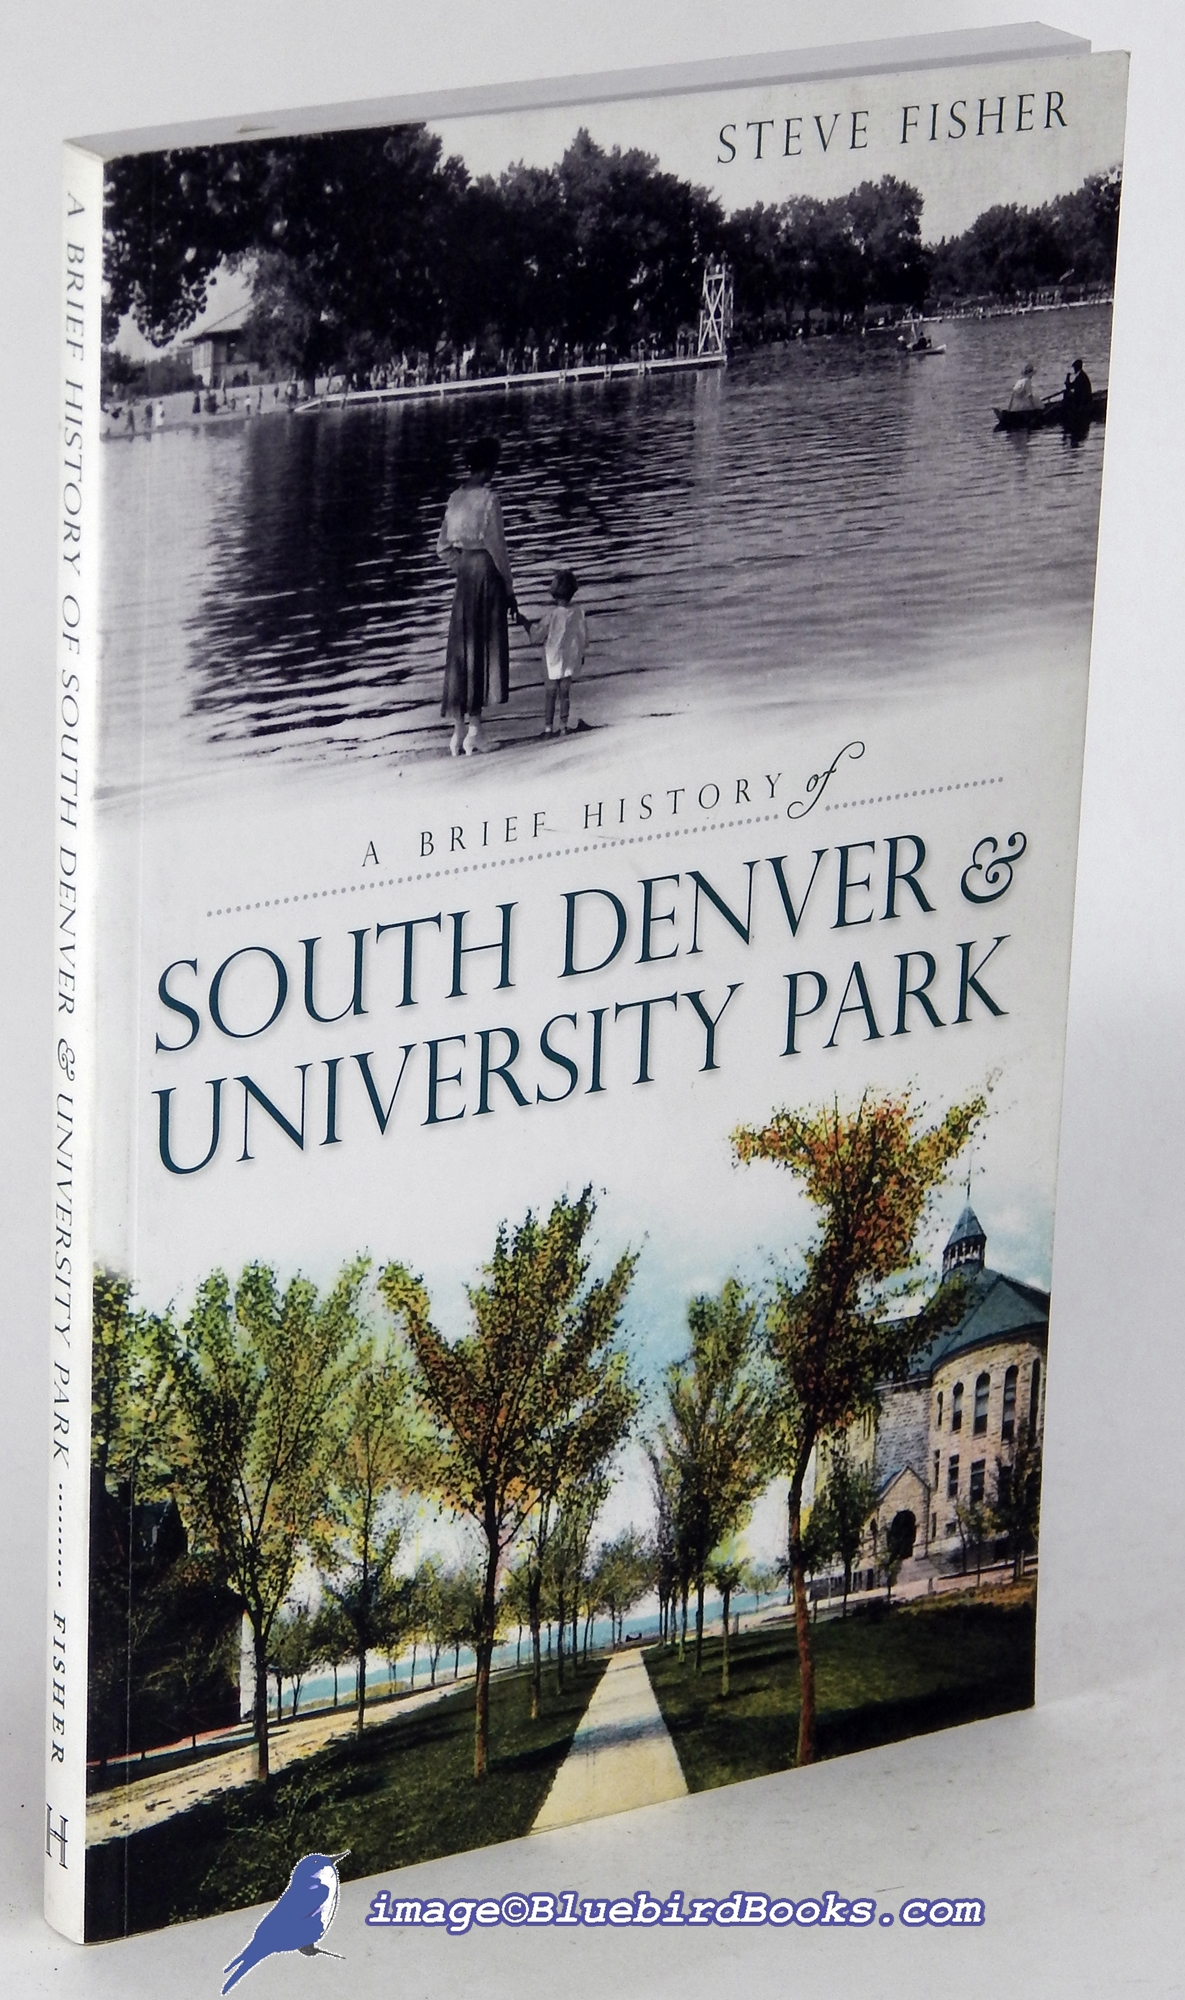 FISHER, STEVE - A Brief History of South Denver and University Park